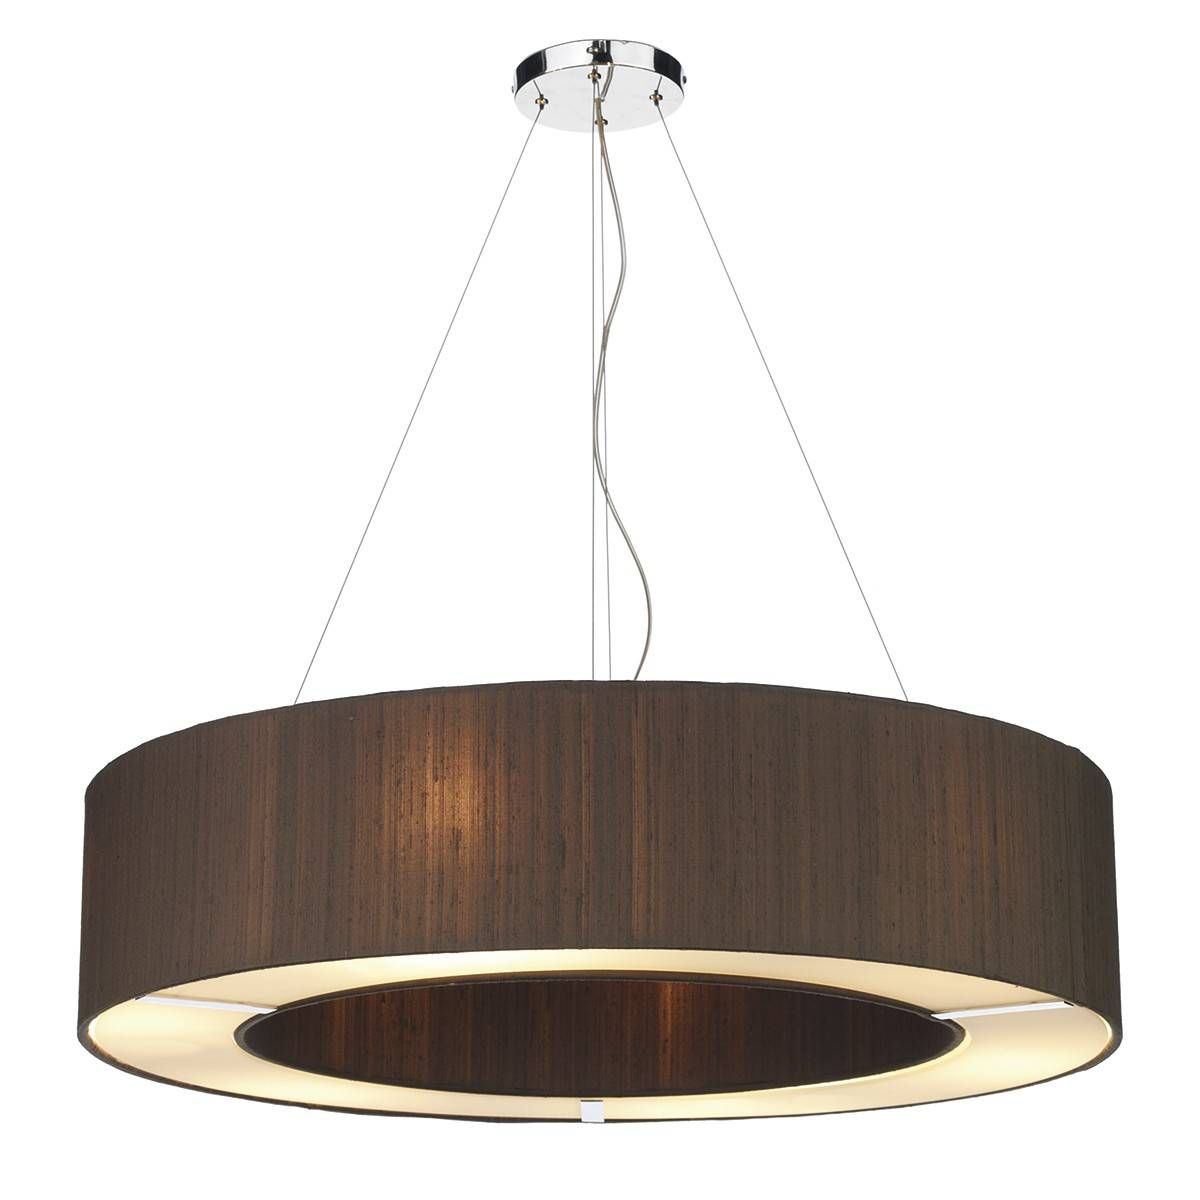 Stunning Ceiling Pendant Light 70 For Your George Kovacs Pendant Within George Kovacs Pendant Lights (View 11 of 15)